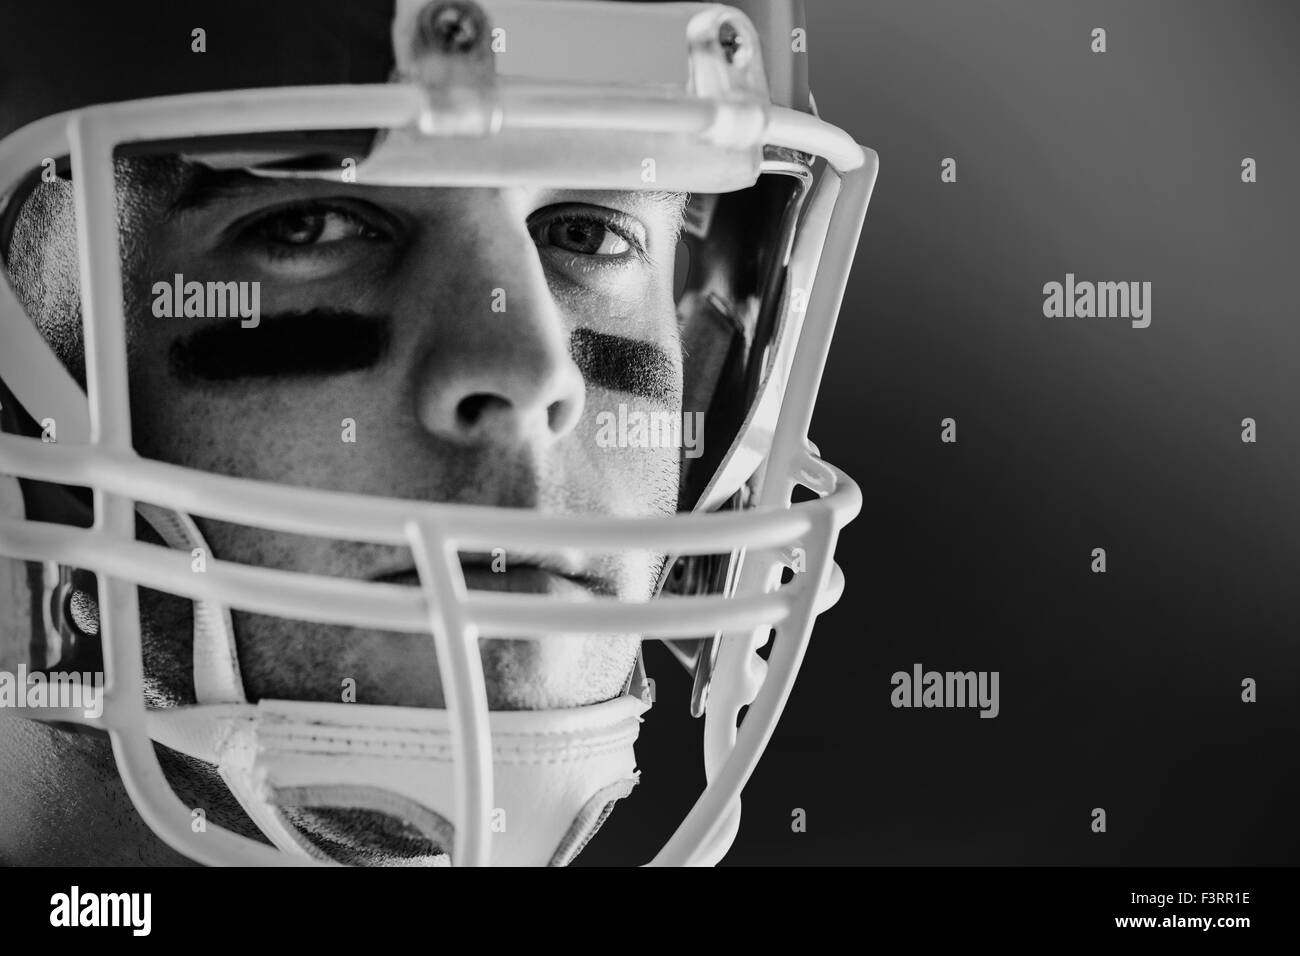 Composite image of portrait of rugby player wearing shoulder pads and  holding helmet Stock Photo - Alamy